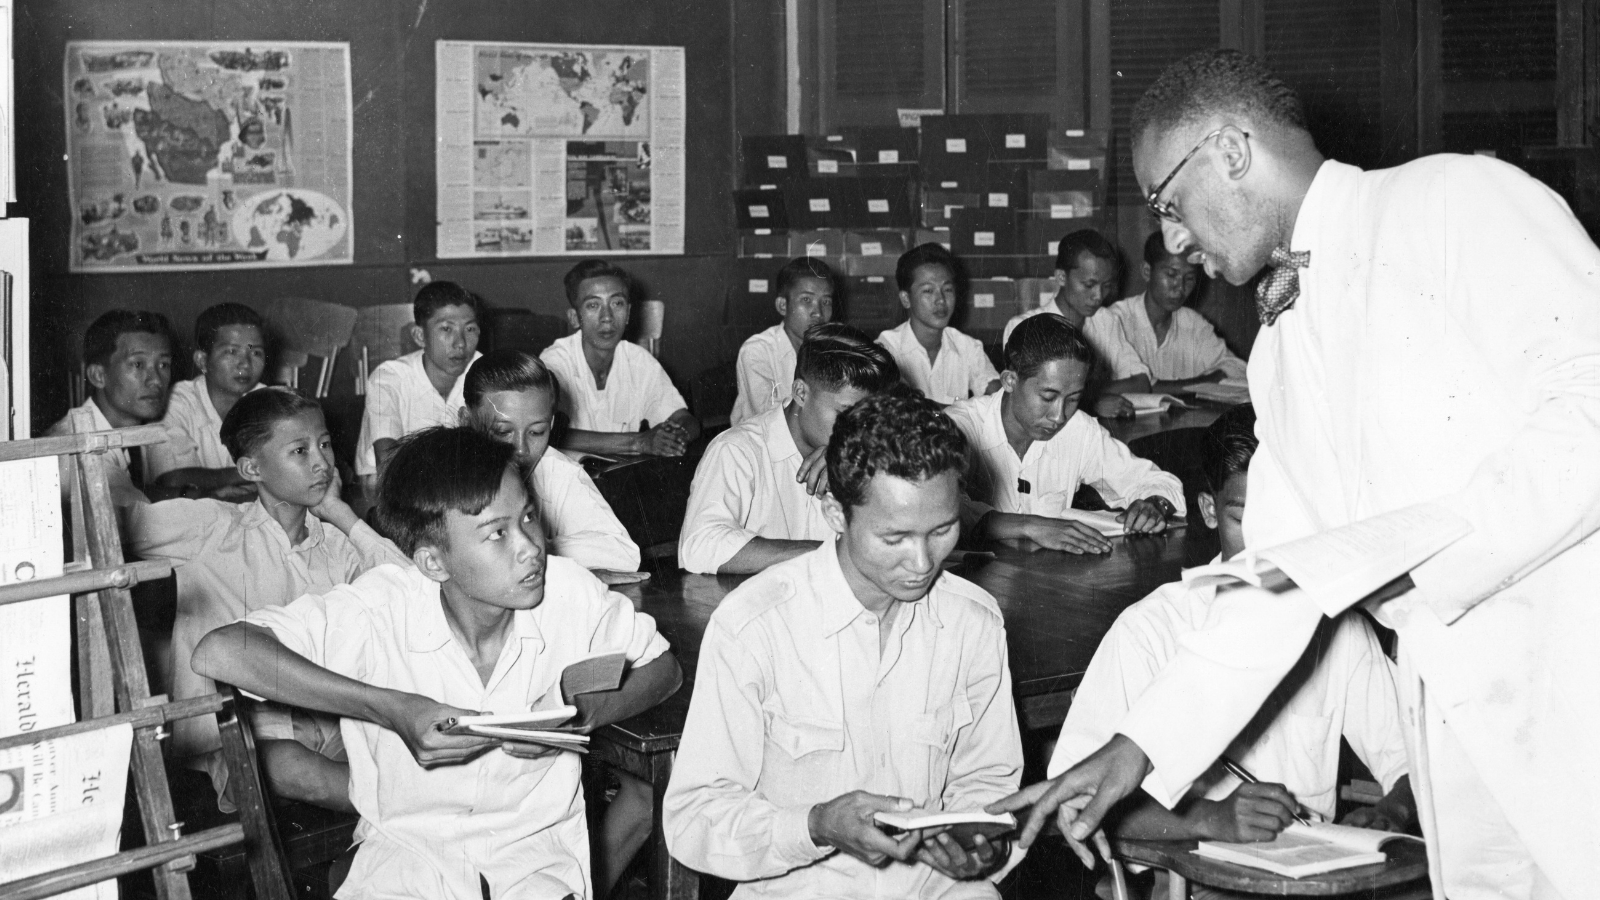 In the early years of the Fulbright Program in Cambodia, U.S. Fulbrighter Charles R. Sadler (right) teaches English to students in Phnom Penh from Ecole Descartes, Lycee Sisowath, Ecole Miche, and members of the city’s Police Department. (Photo courtesy of University of Arkansas Libraries Special Collections/ Public Domain)